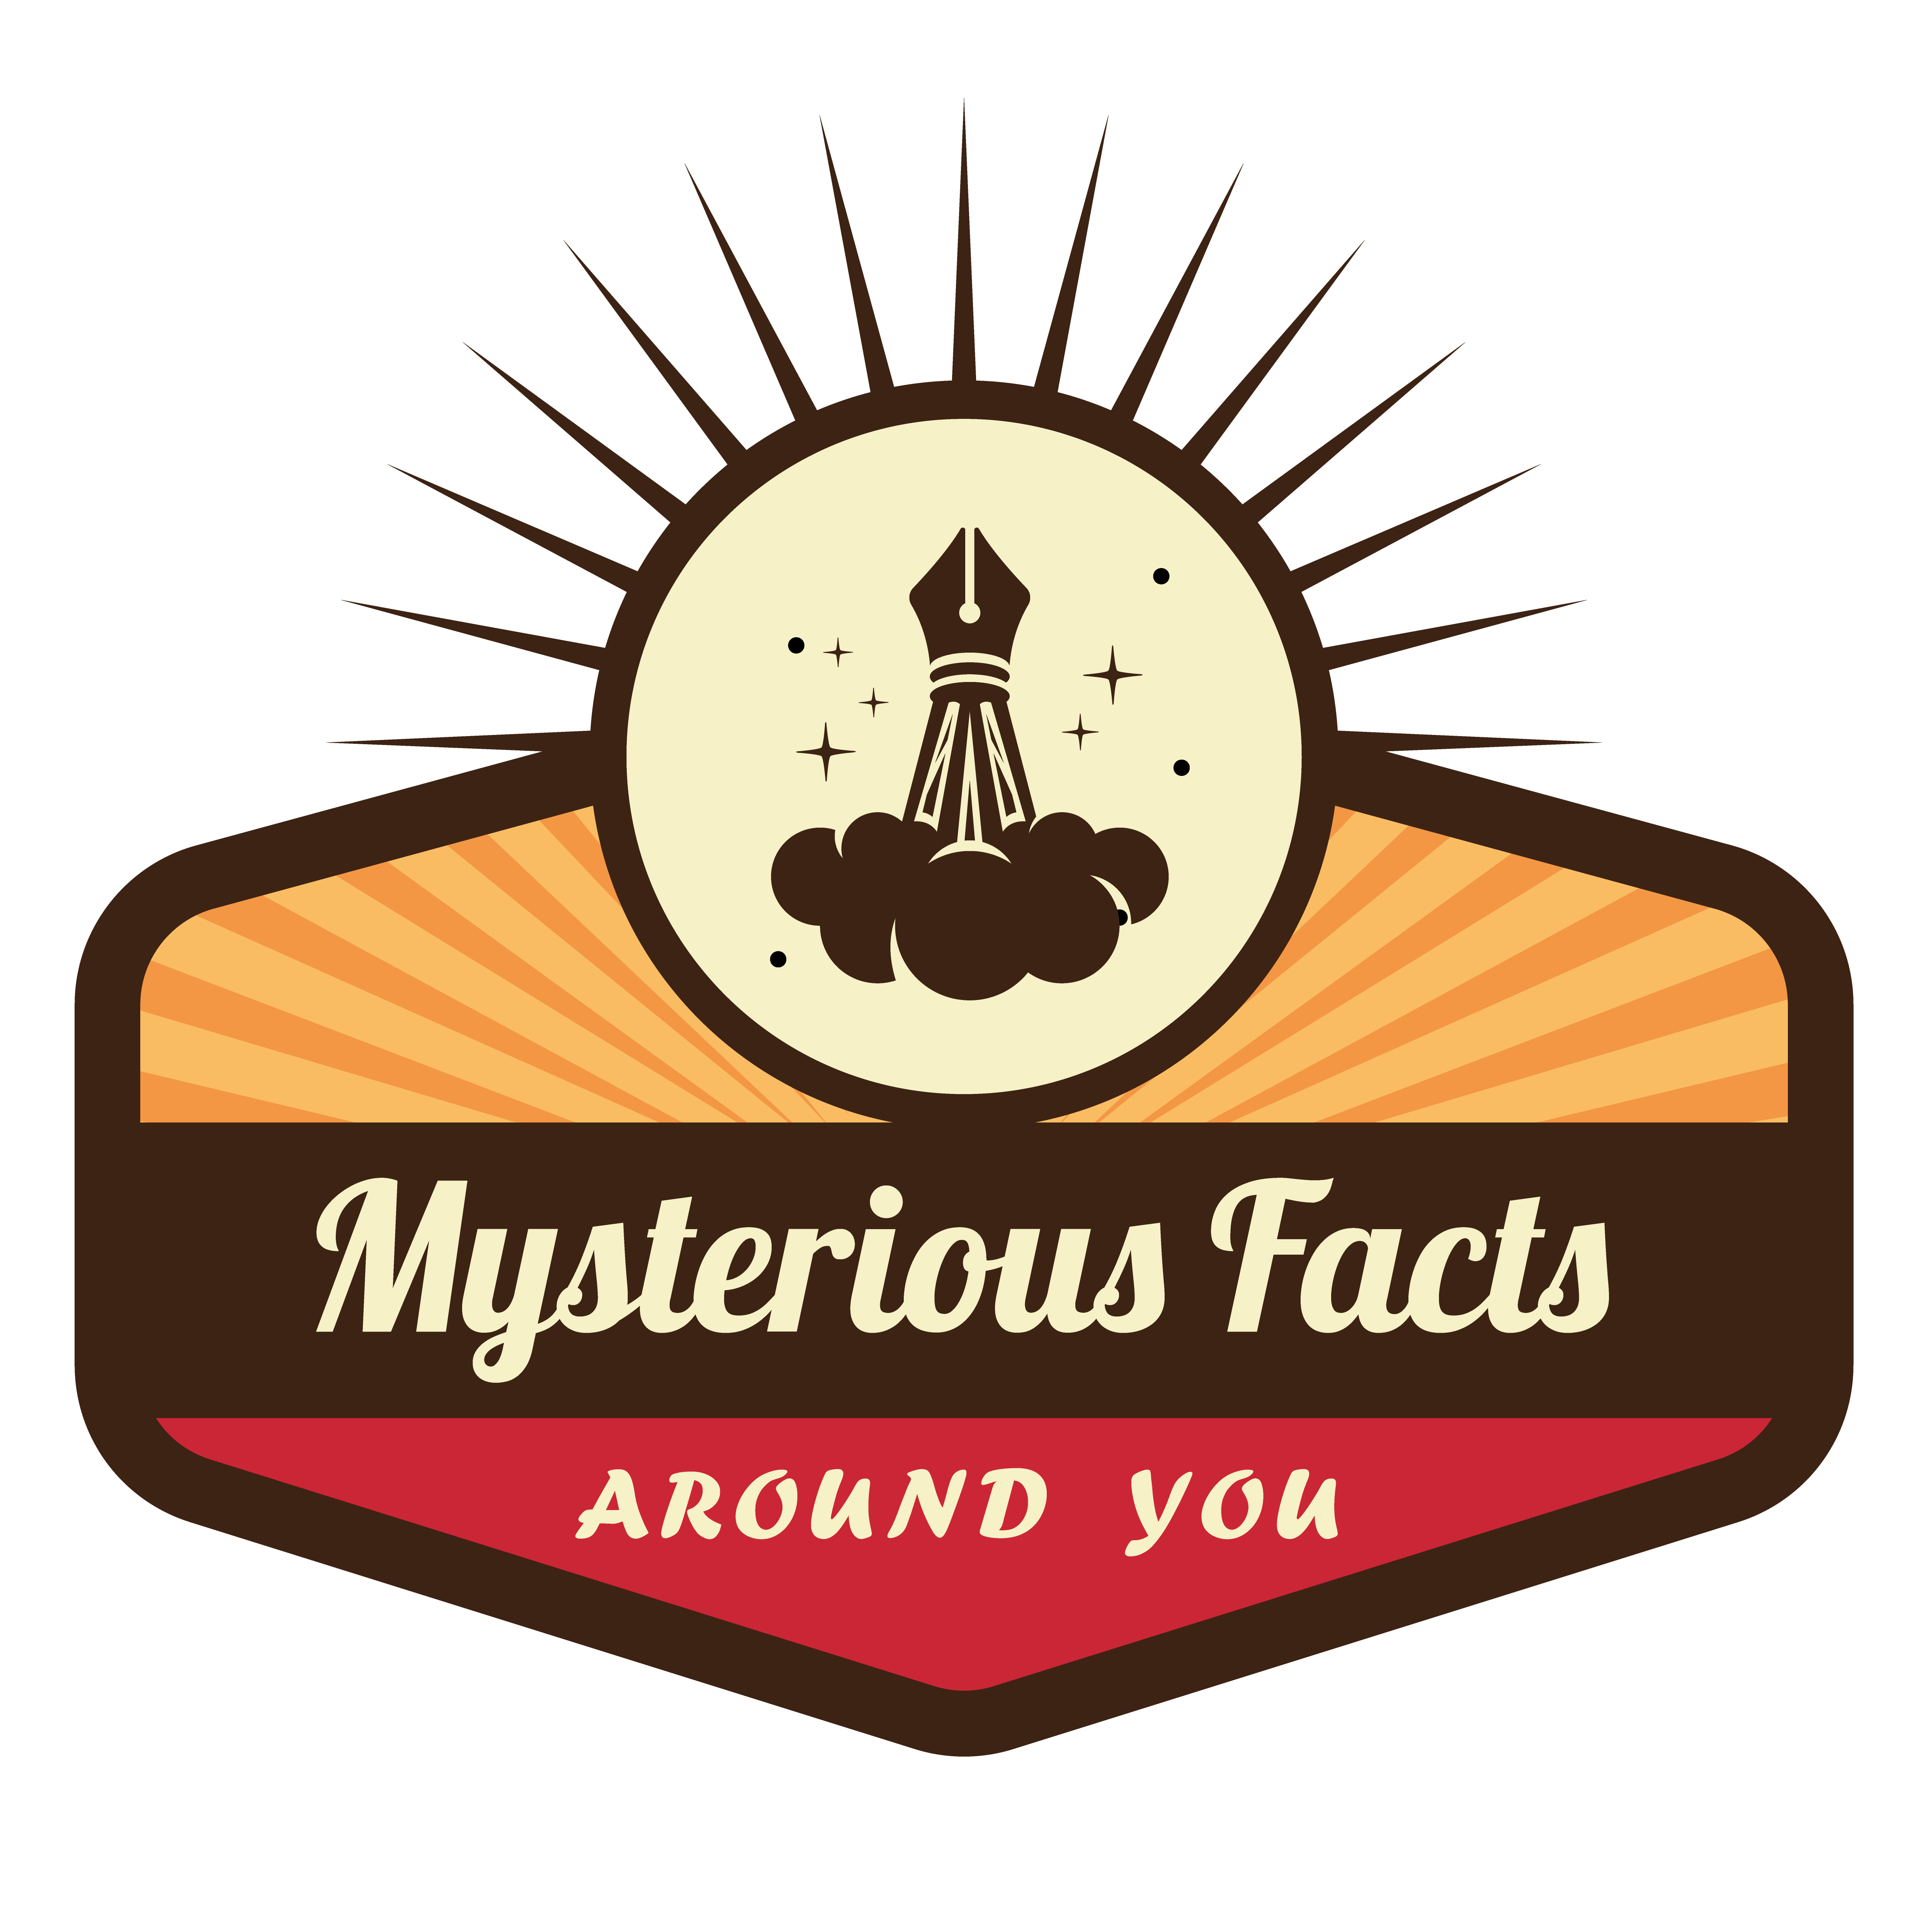 Mysterious Facts Around You